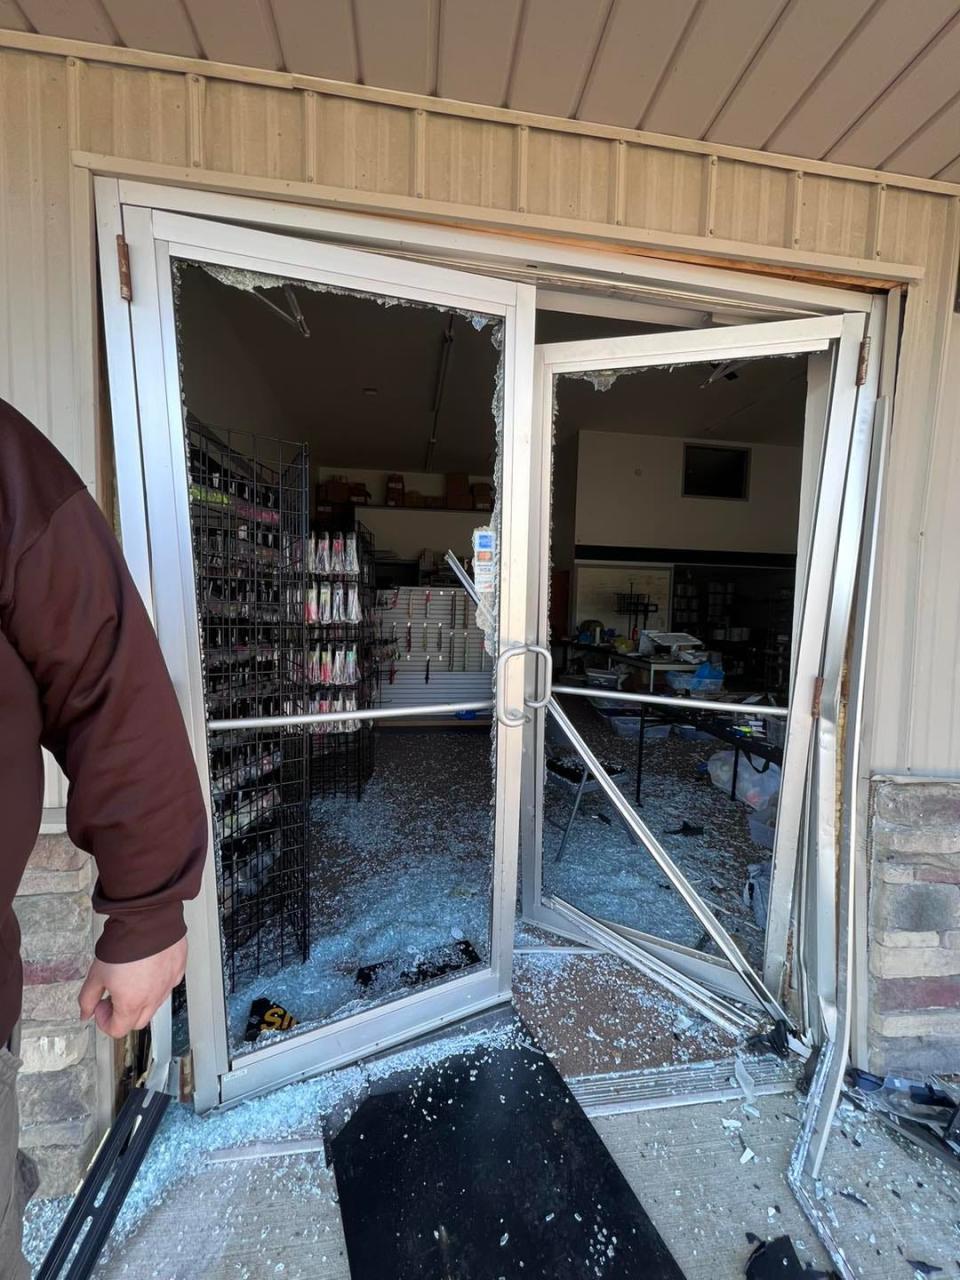 DeLong Lures at 2318 S. Locust St. in Canal Fulton was damaged early Tuesday morning when a vehicle smashed through the front doors. The vehicle also smashed through the D&D Precision where numerous firearms were taken.